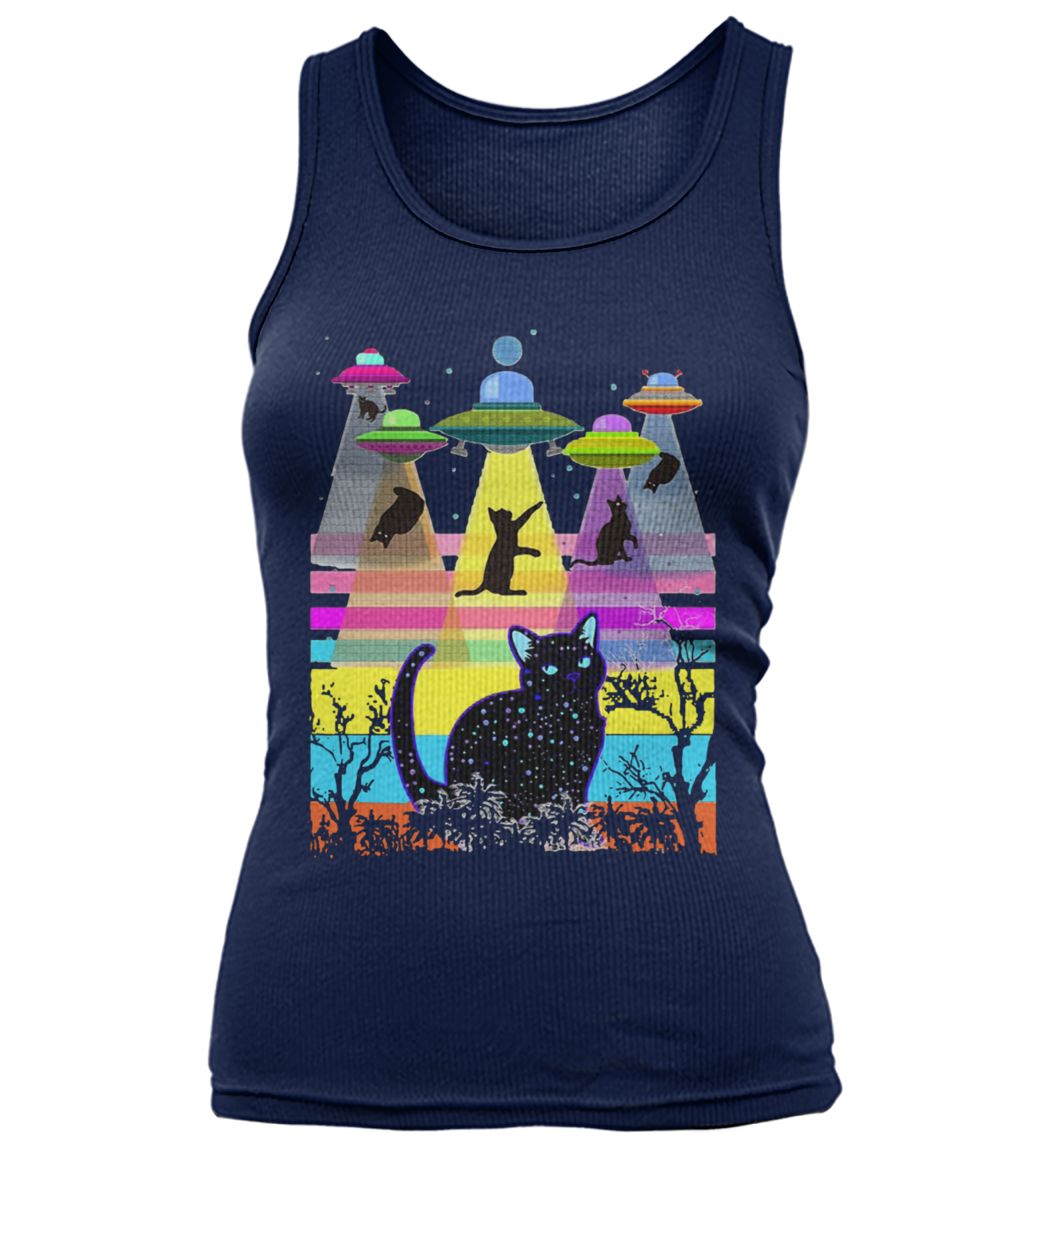 Storm area 51 they can't stop all of us cats women's tank top